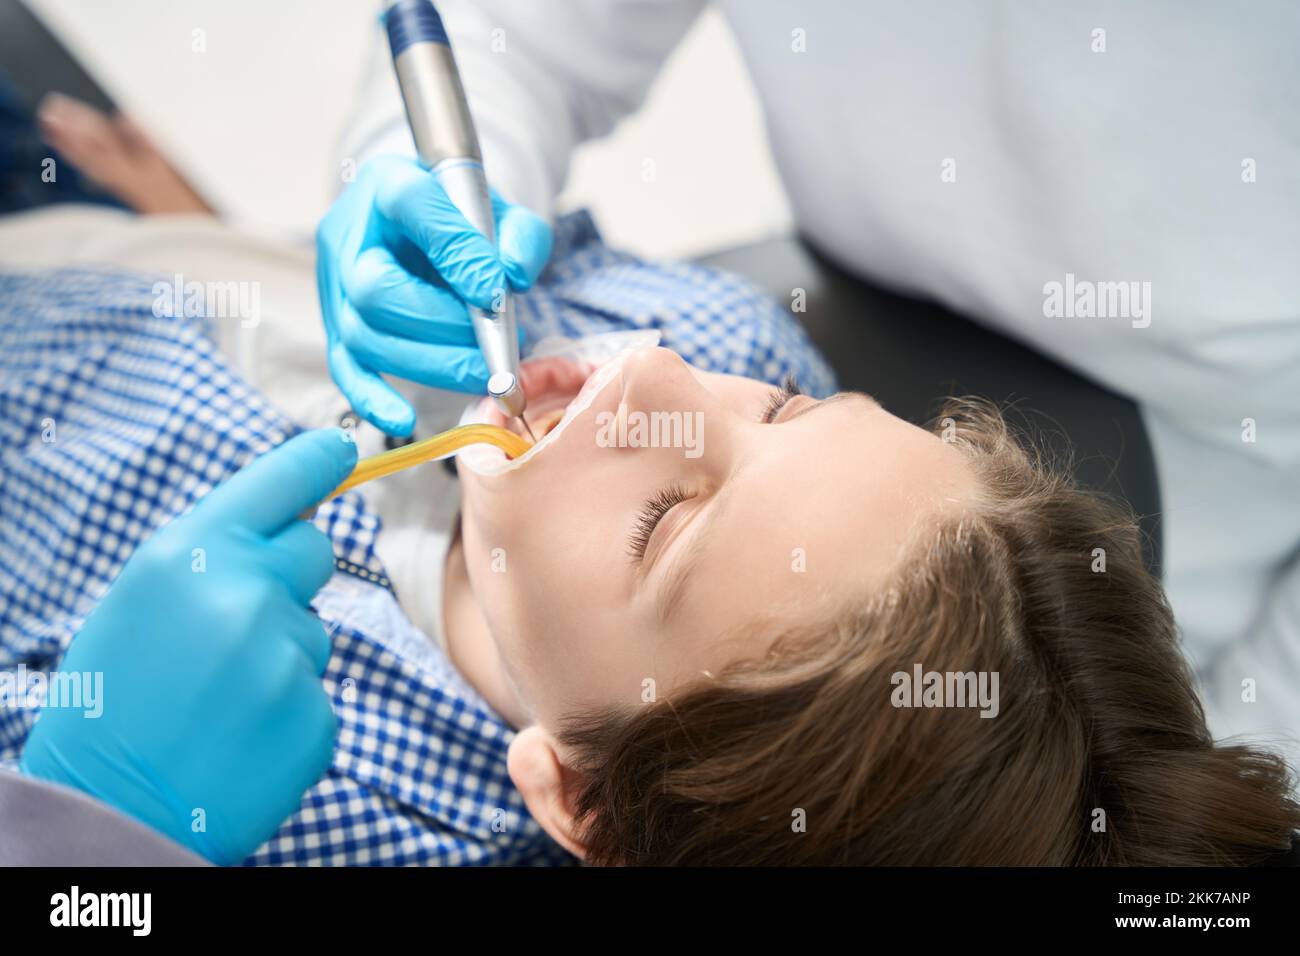 Teenager at a dentist appointment in a medical institution Stock Photo